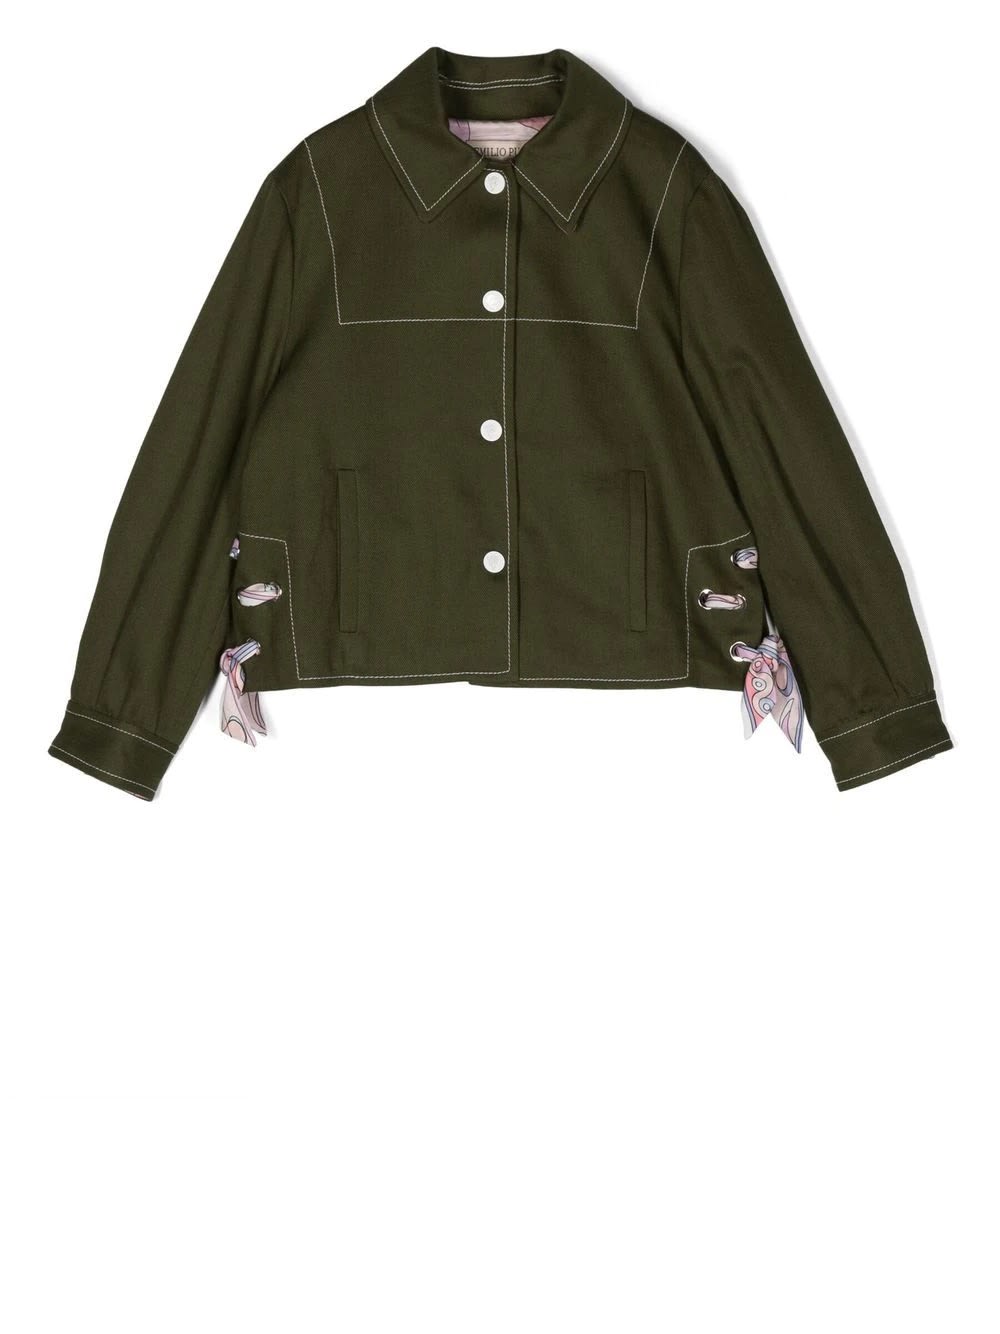 EMILIO PUCCI GREEN JACKET WITH PINK PRINTED BOWS